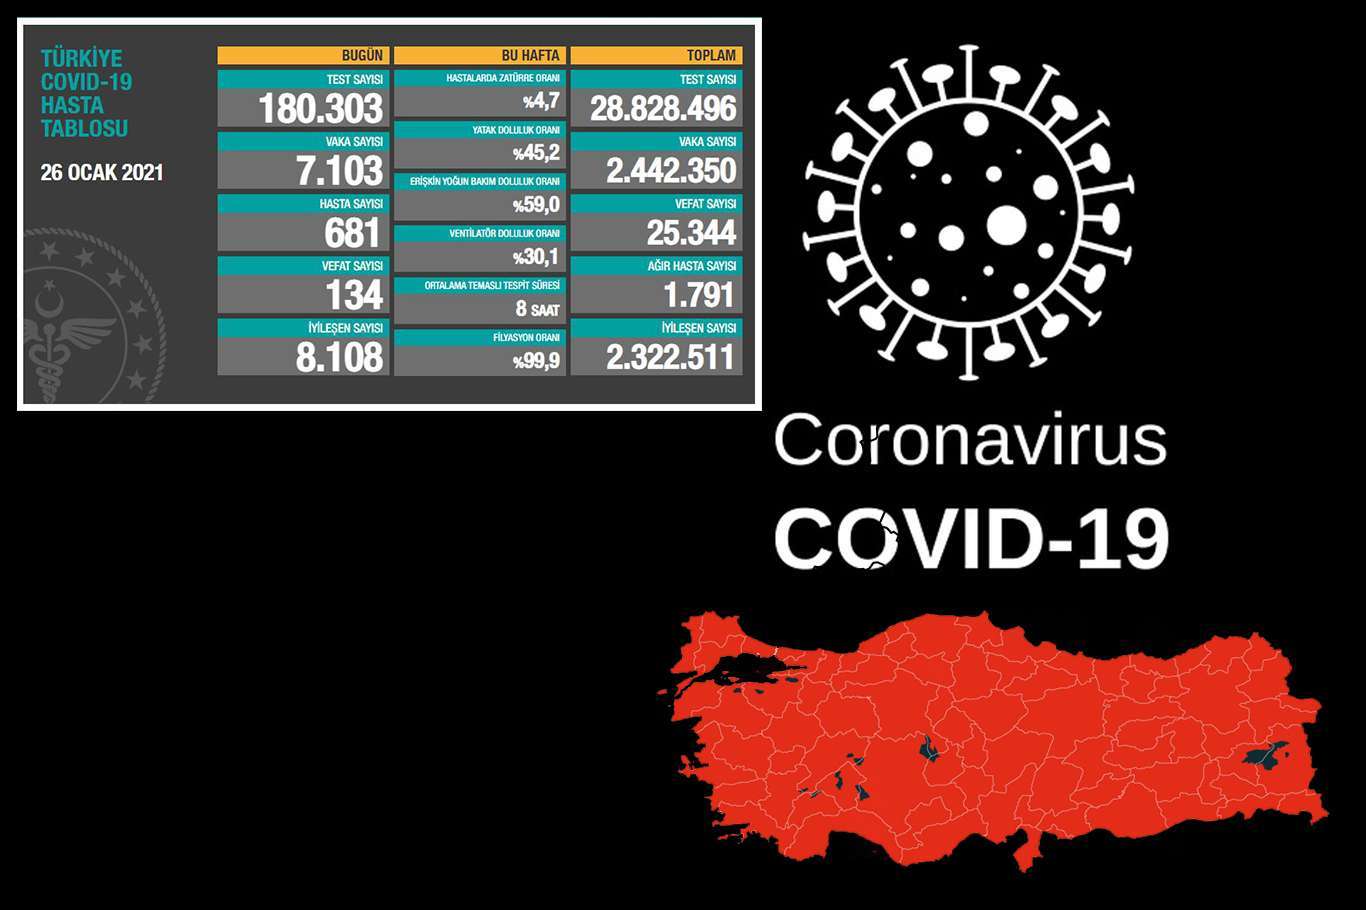 Turkey records 7,103 daily confirmed cases of COVID-19